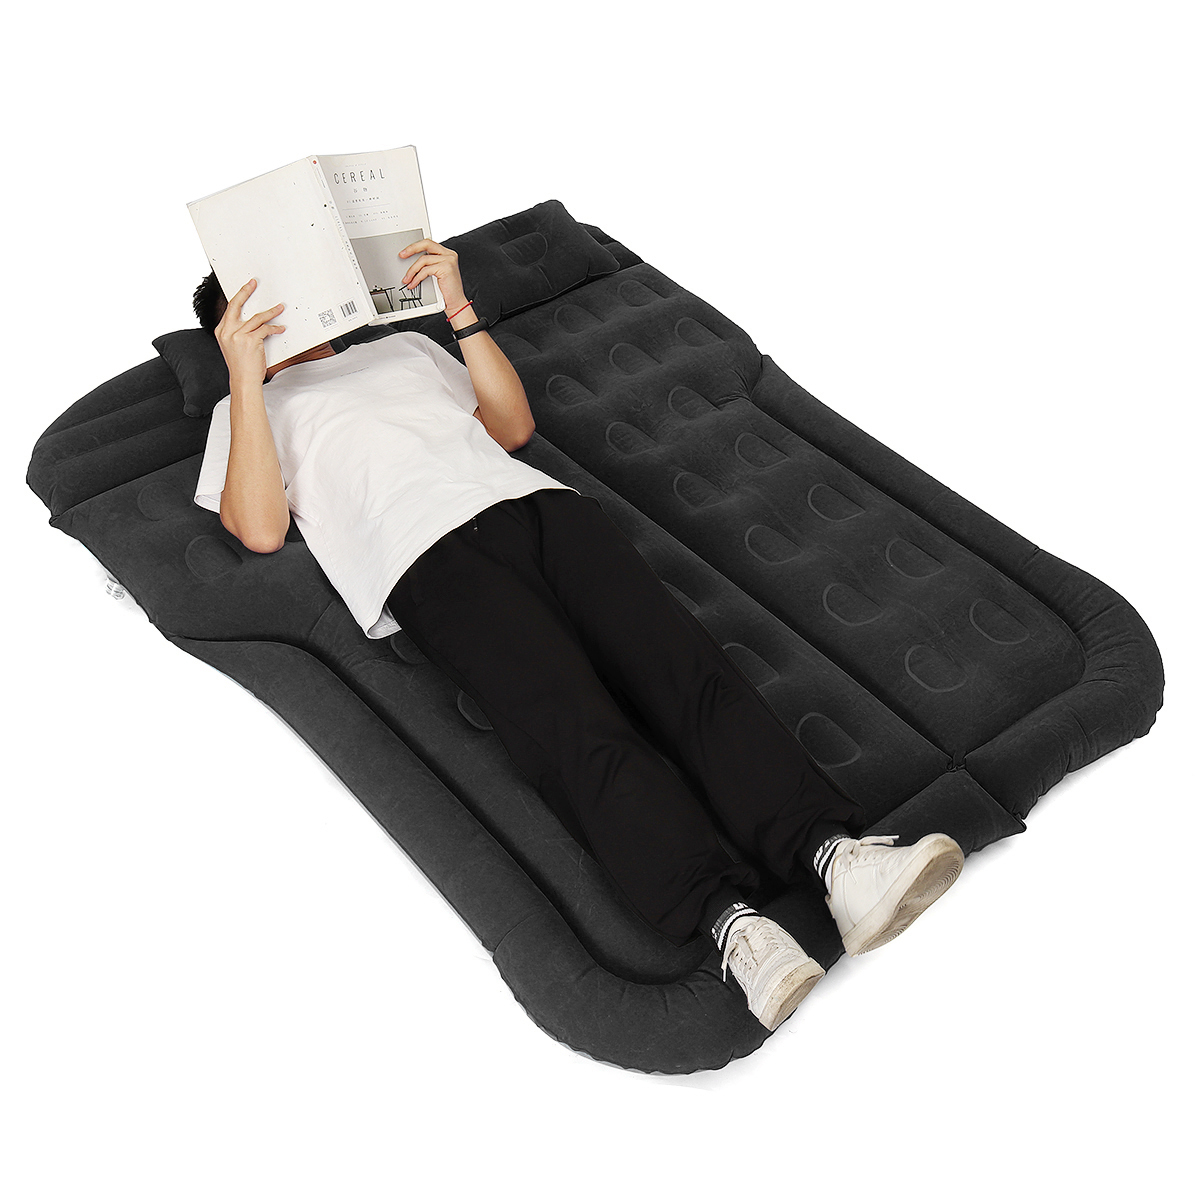 180x130cm-Multifunctional-Inflatable-Car-Air-Mattress-Durable-Back-Seat-Cover-Travel-Bed-Moisture-pr-1888970-15